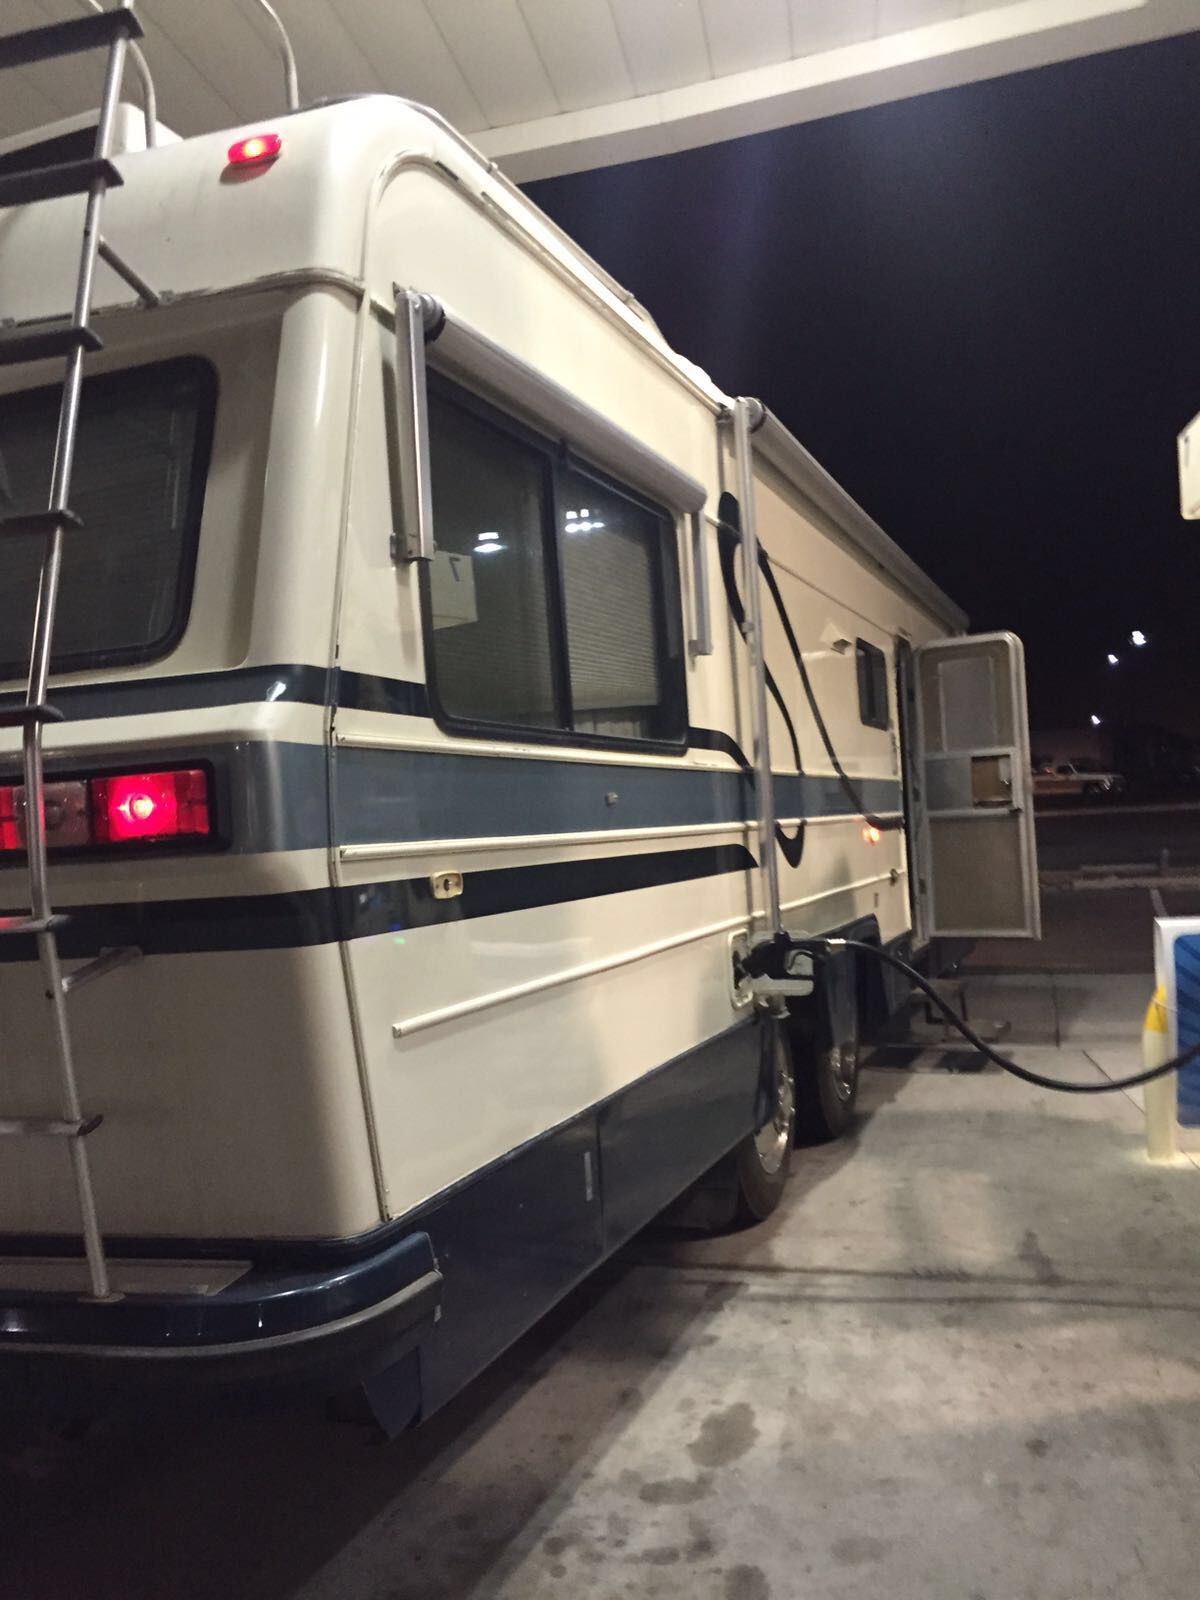 Motor home 1987very low mileage, new tires really good interior motor and trans runs perfectly.